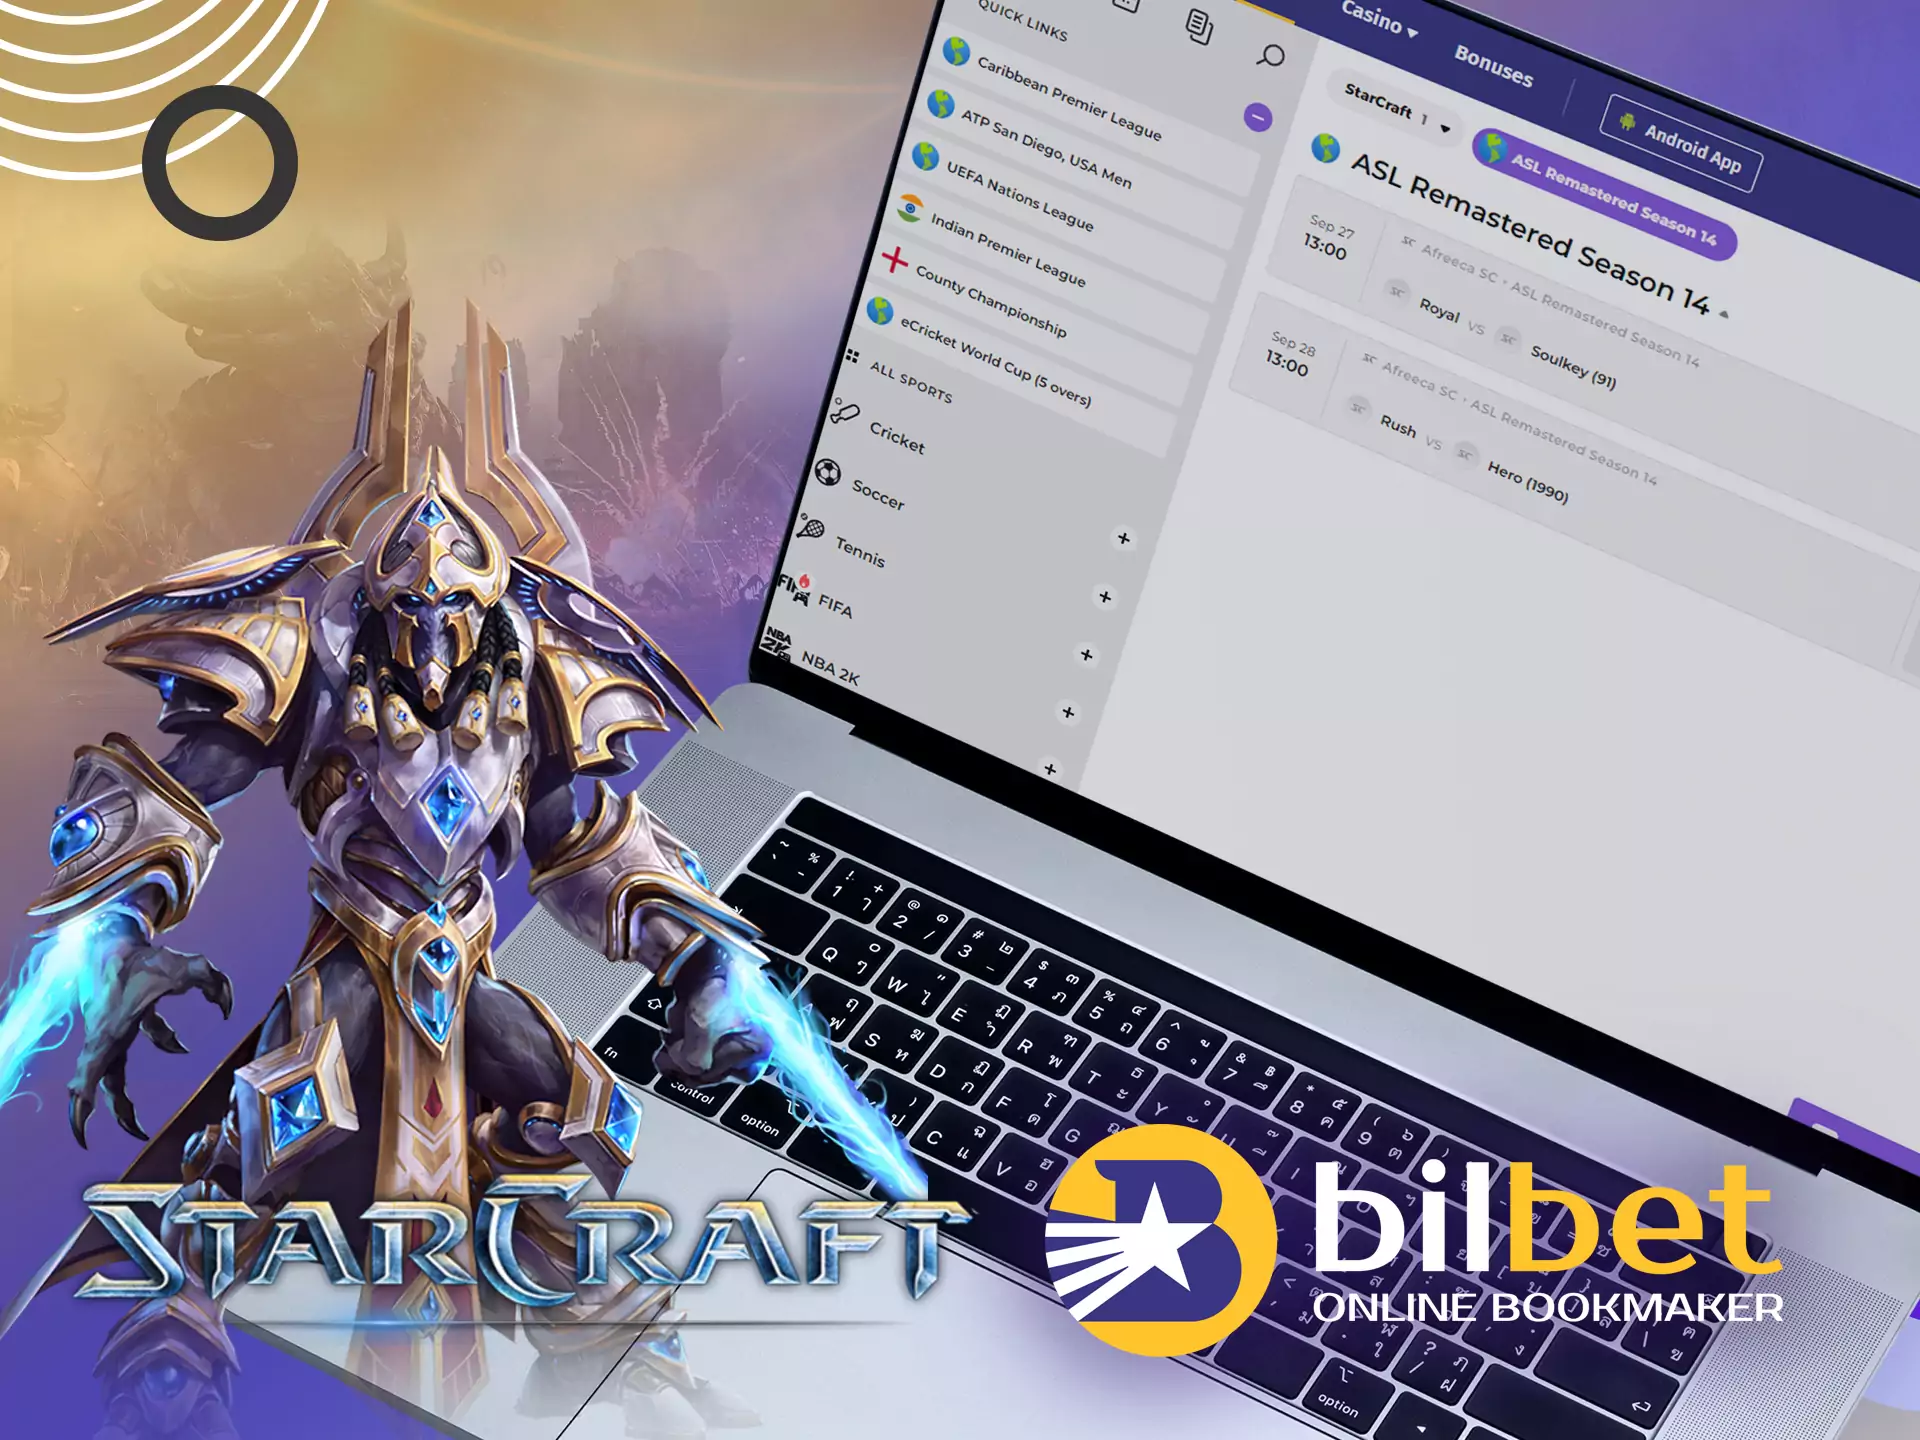 Starcraft 2 is widely presented in the Bilbet sportsbook.